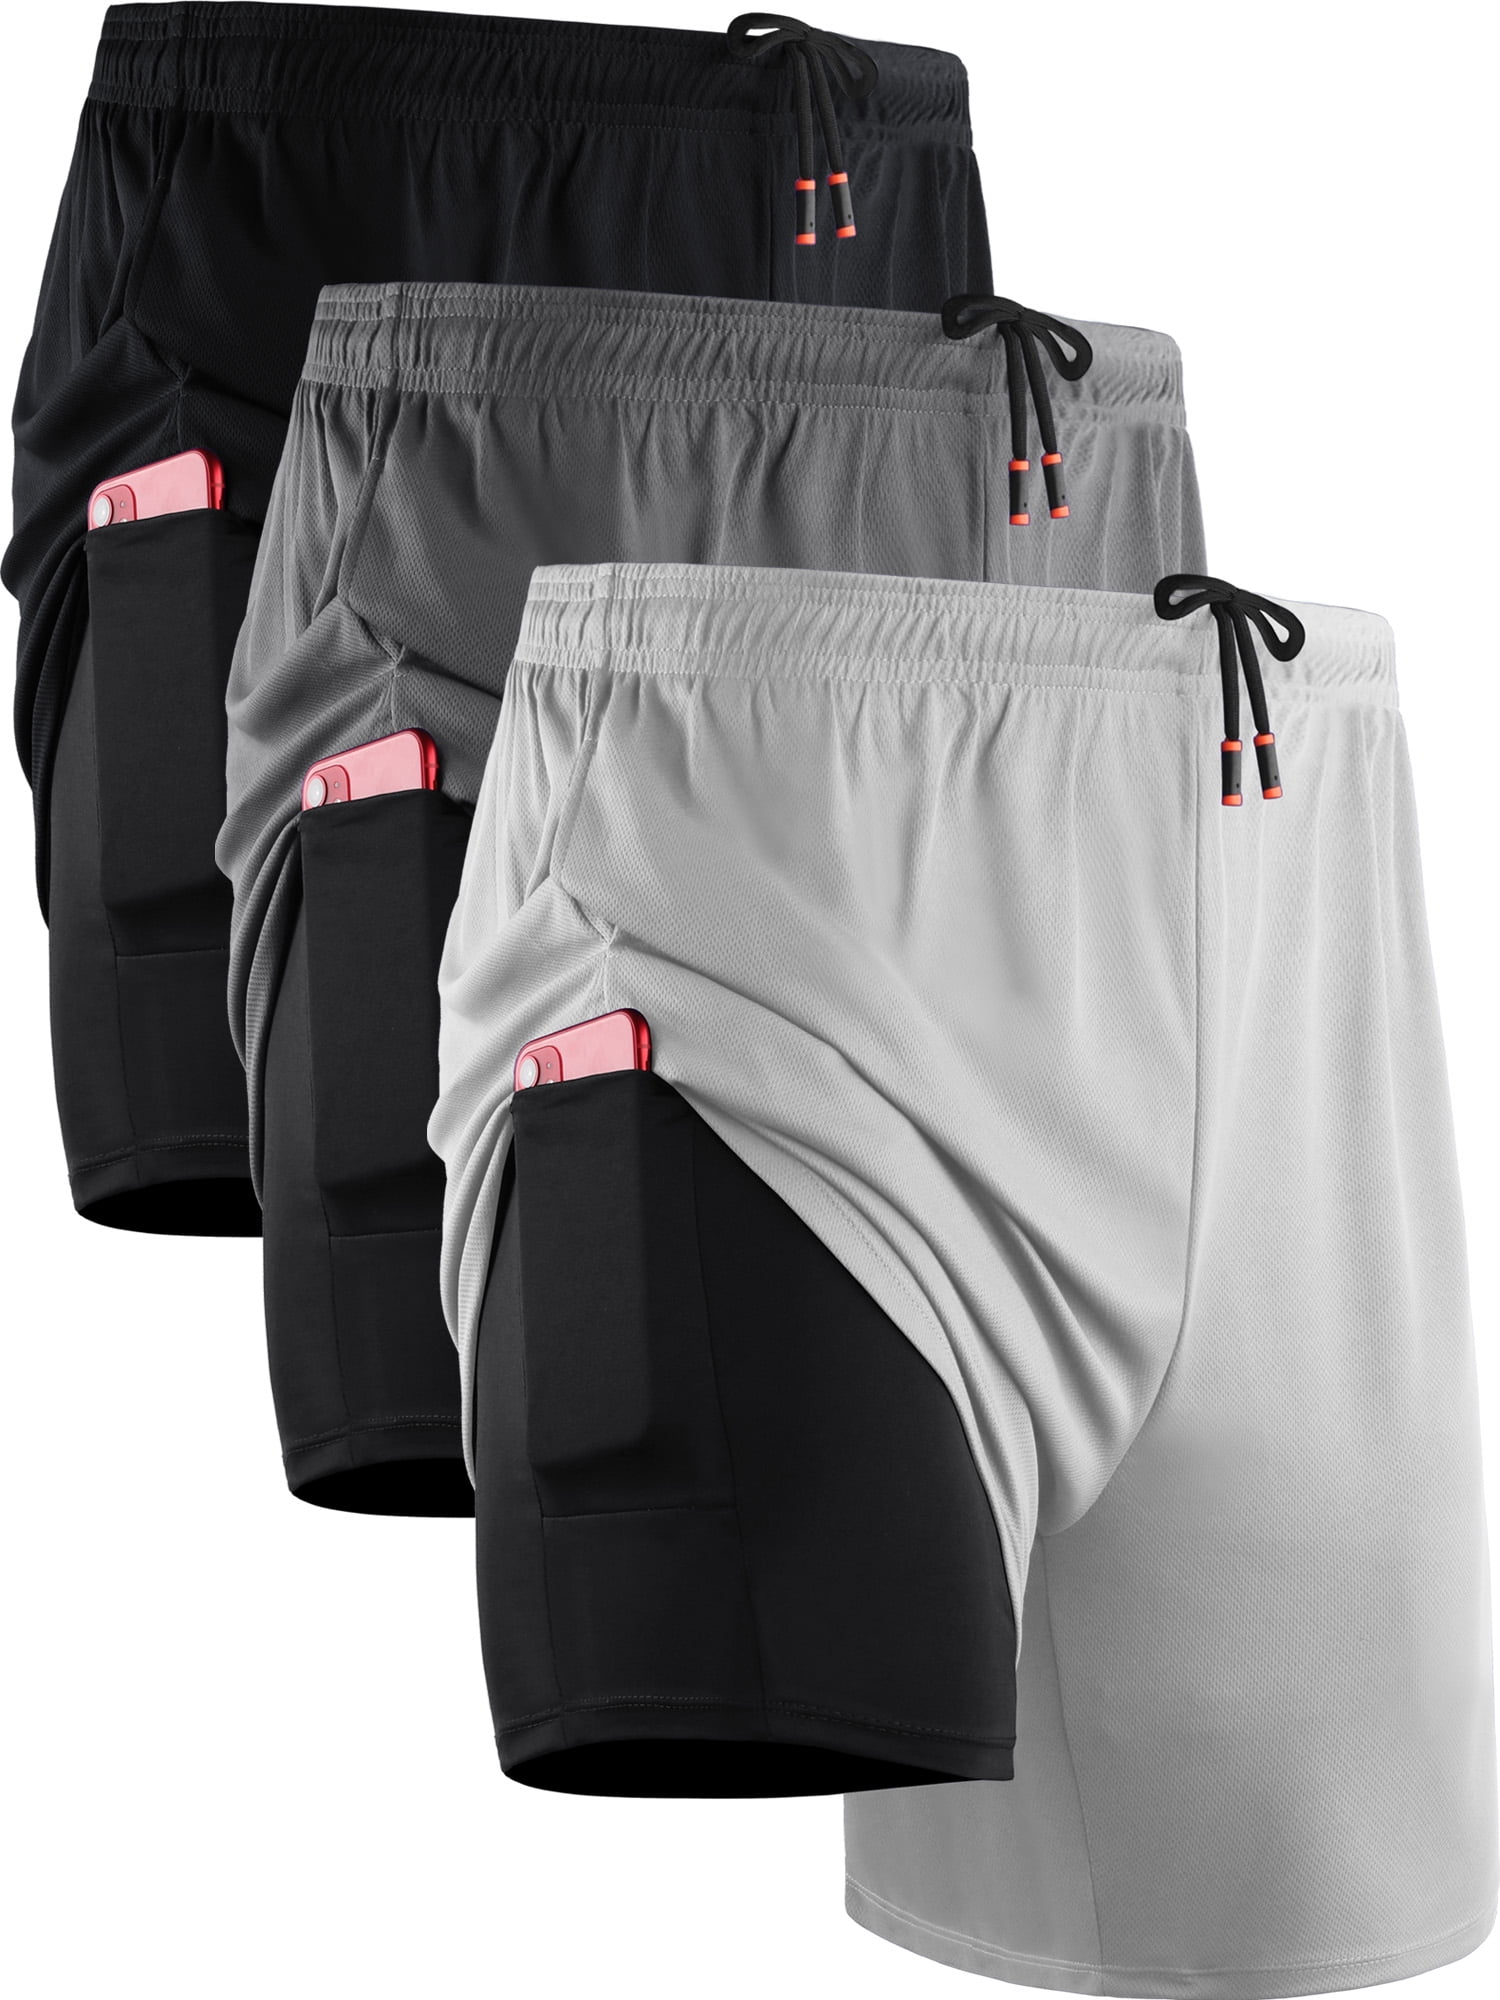 NELEUS Mens 2 in 1 Dry Fit Workout Shorts with Liner and  Pockets,Black+Gray+White,US Size S